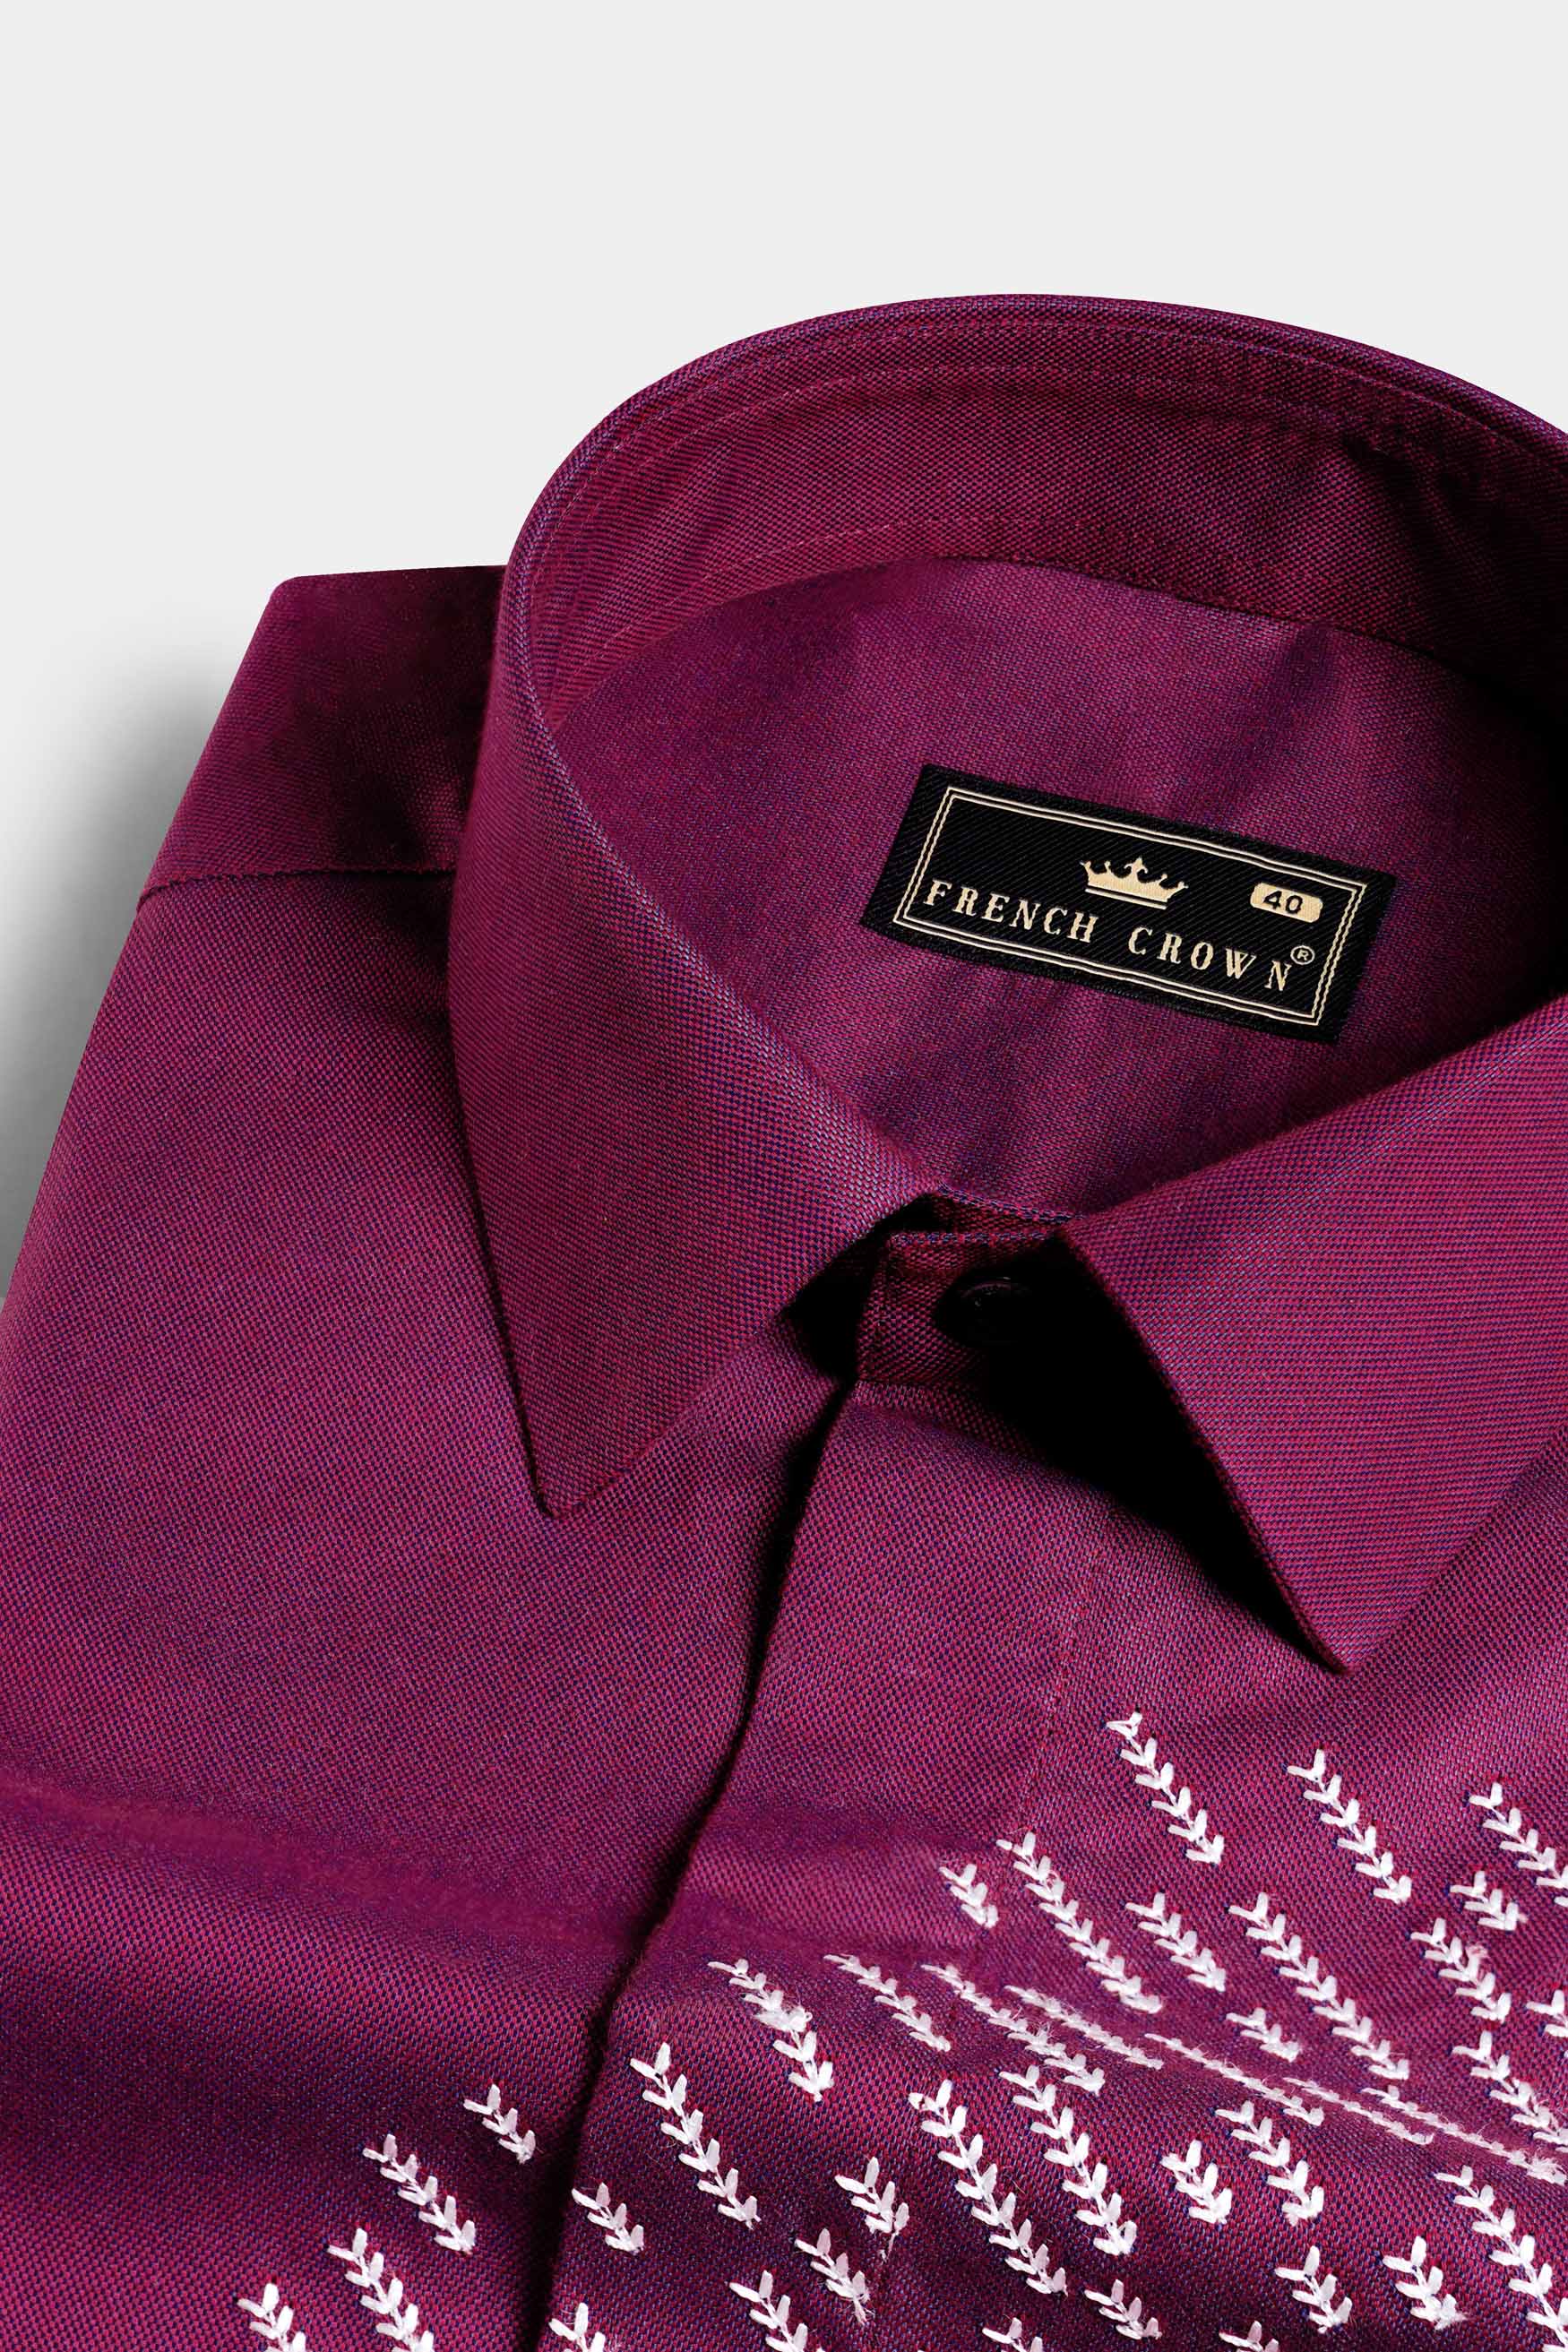 Mulberry Wine Leaves Embroidered Two Tone Royal Oxford Designer Shirt